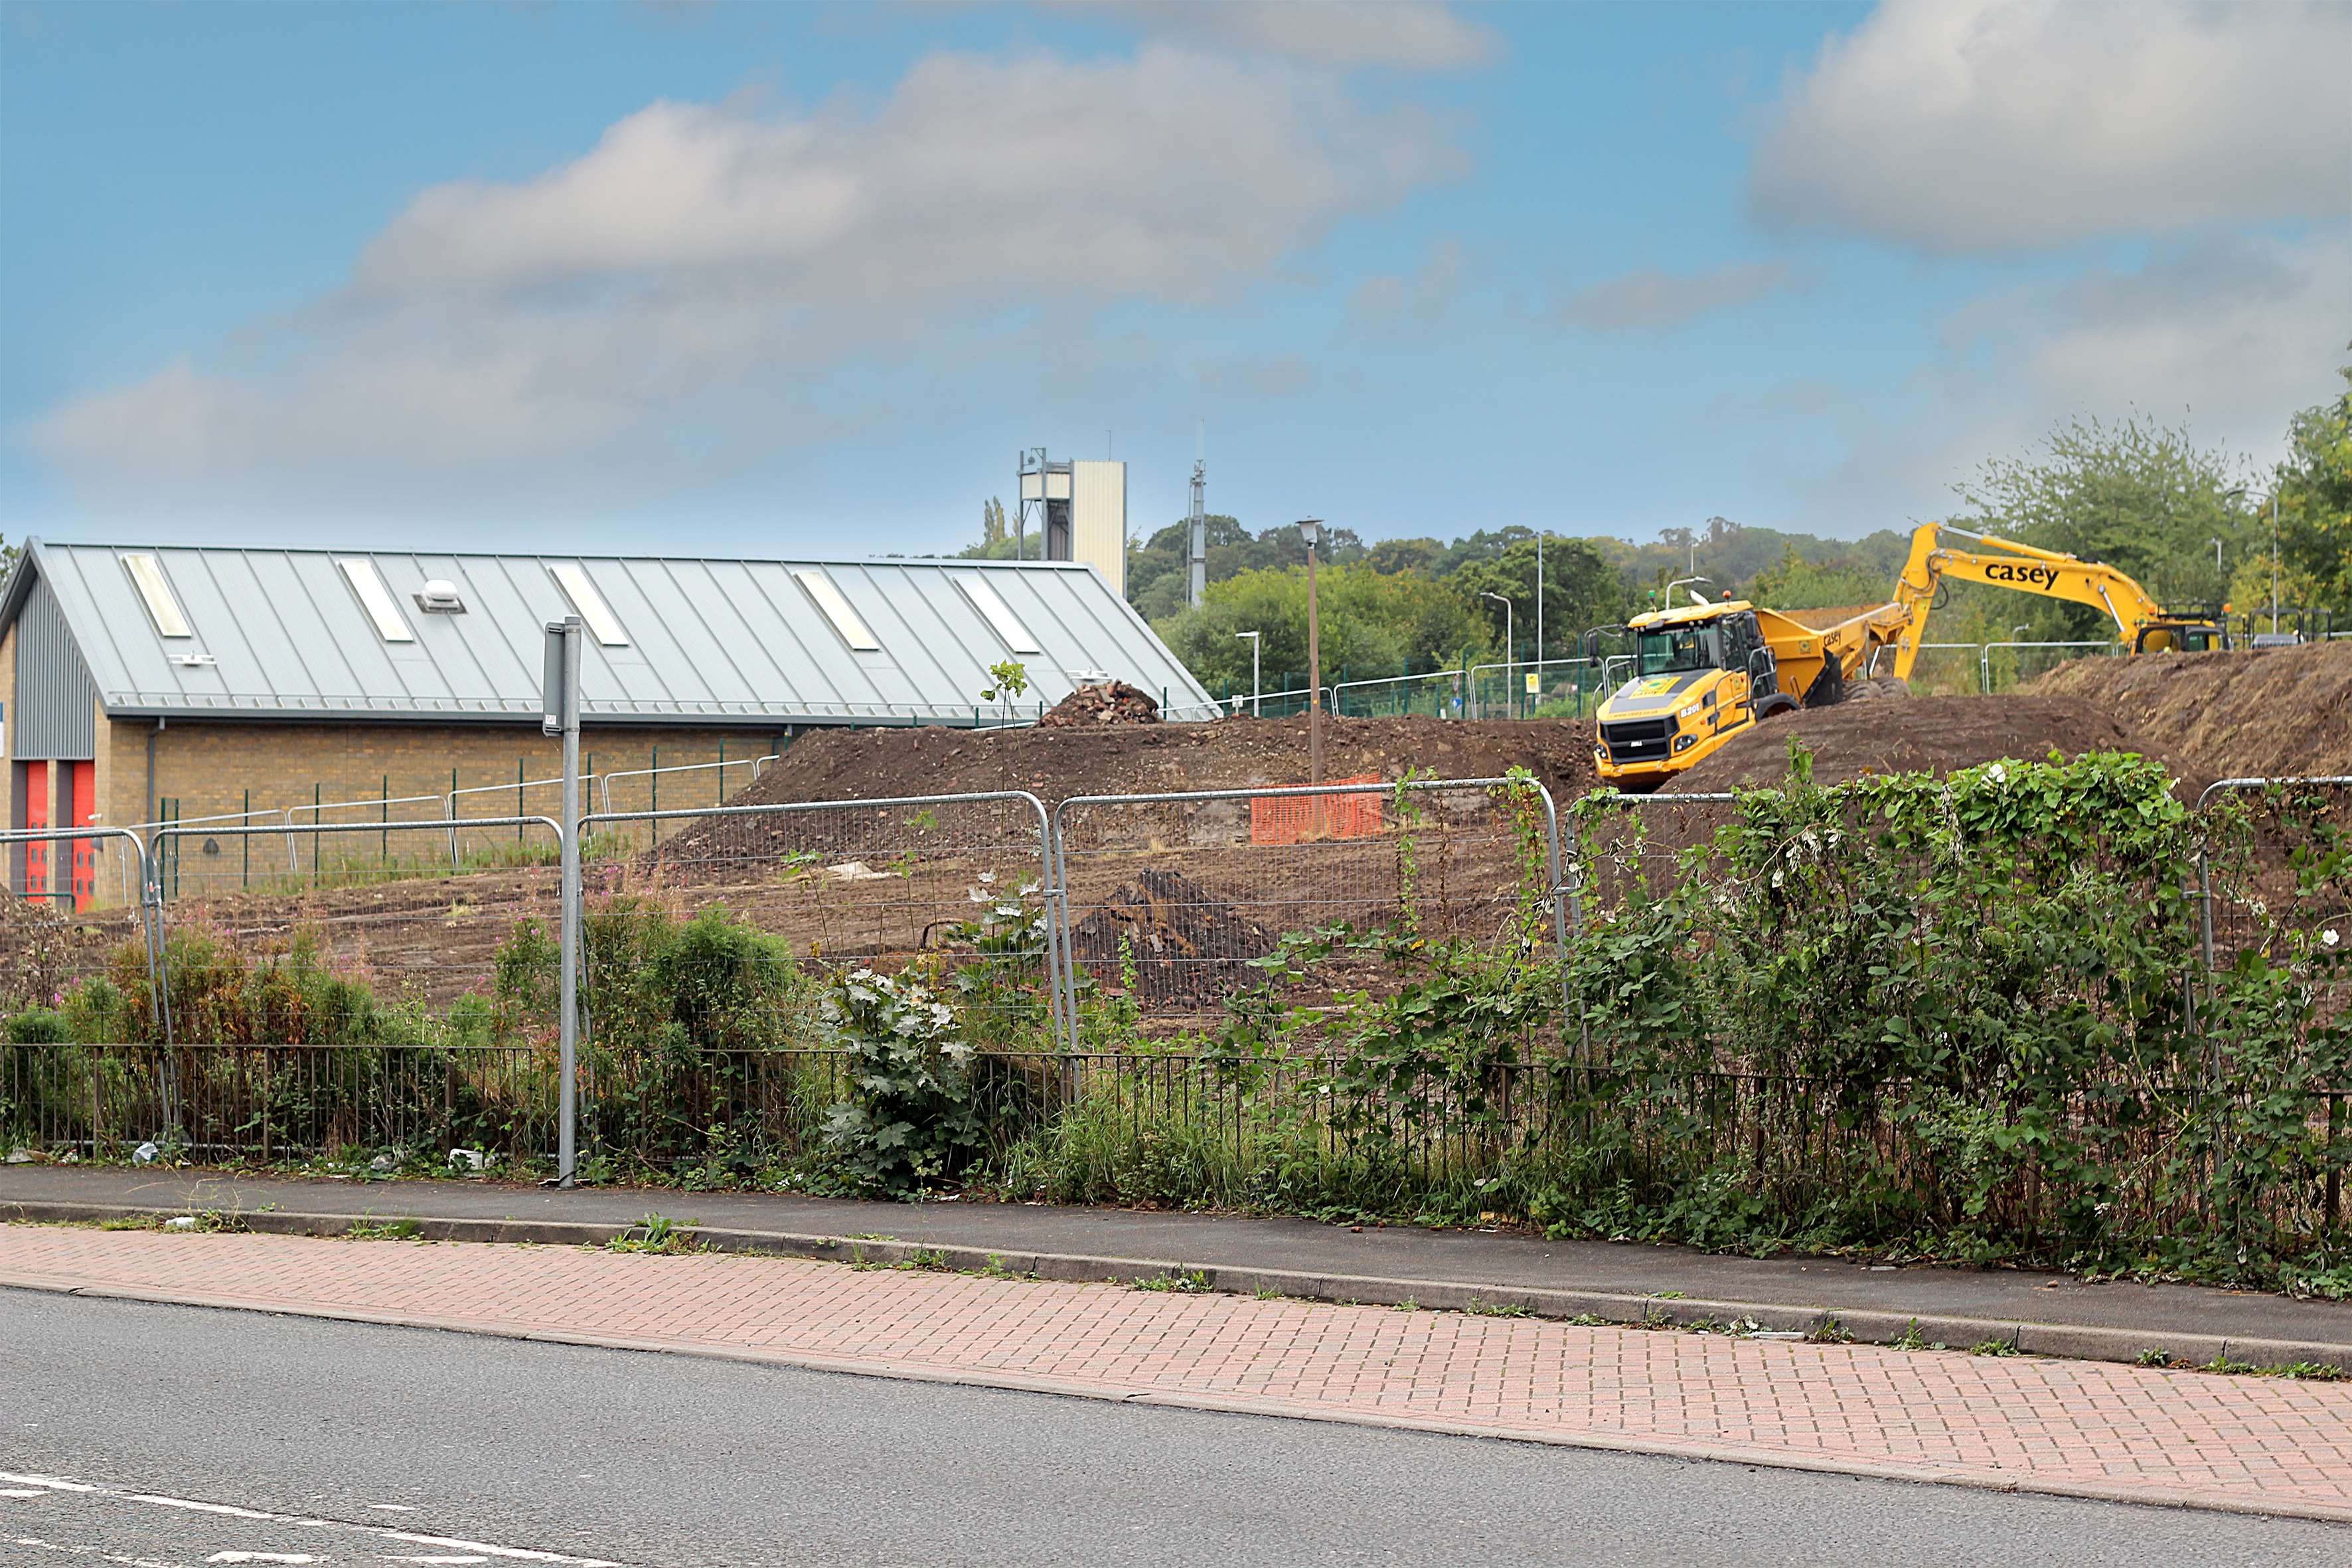 Digger at work on the Valley Road site